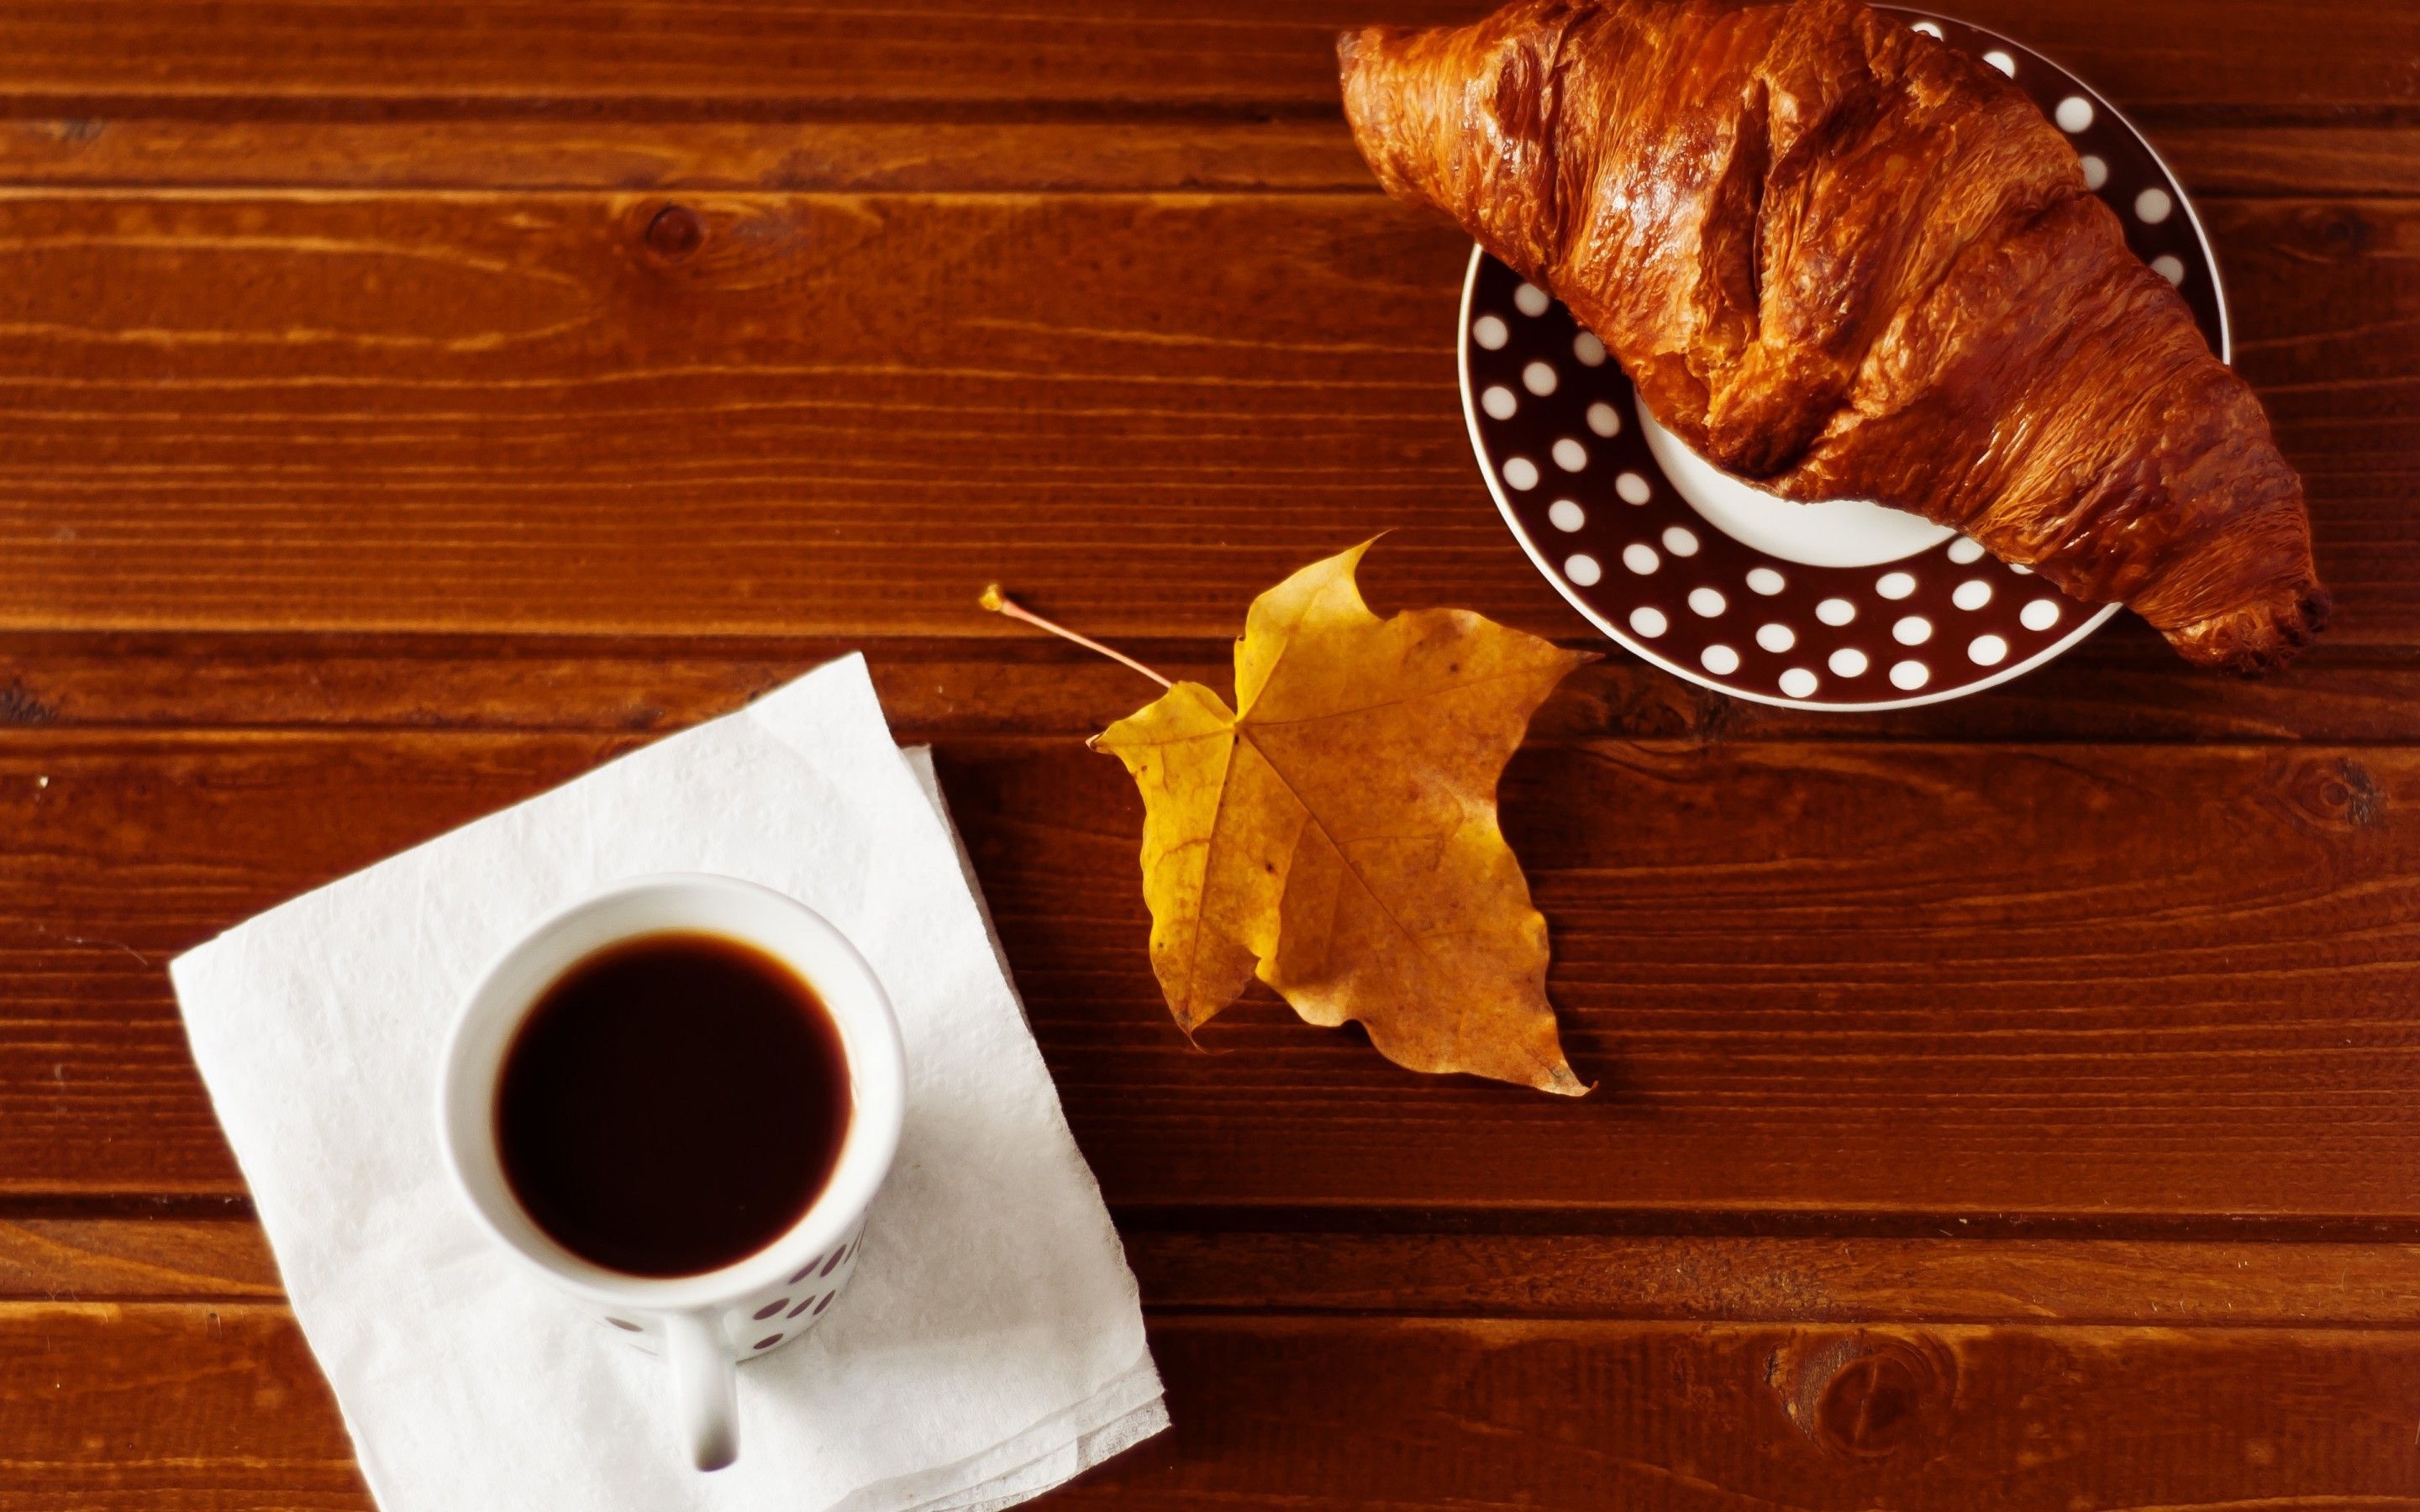 Croissant: A common part of a continental breakfast in Europe. 2880x1800 HD Wallpaper.